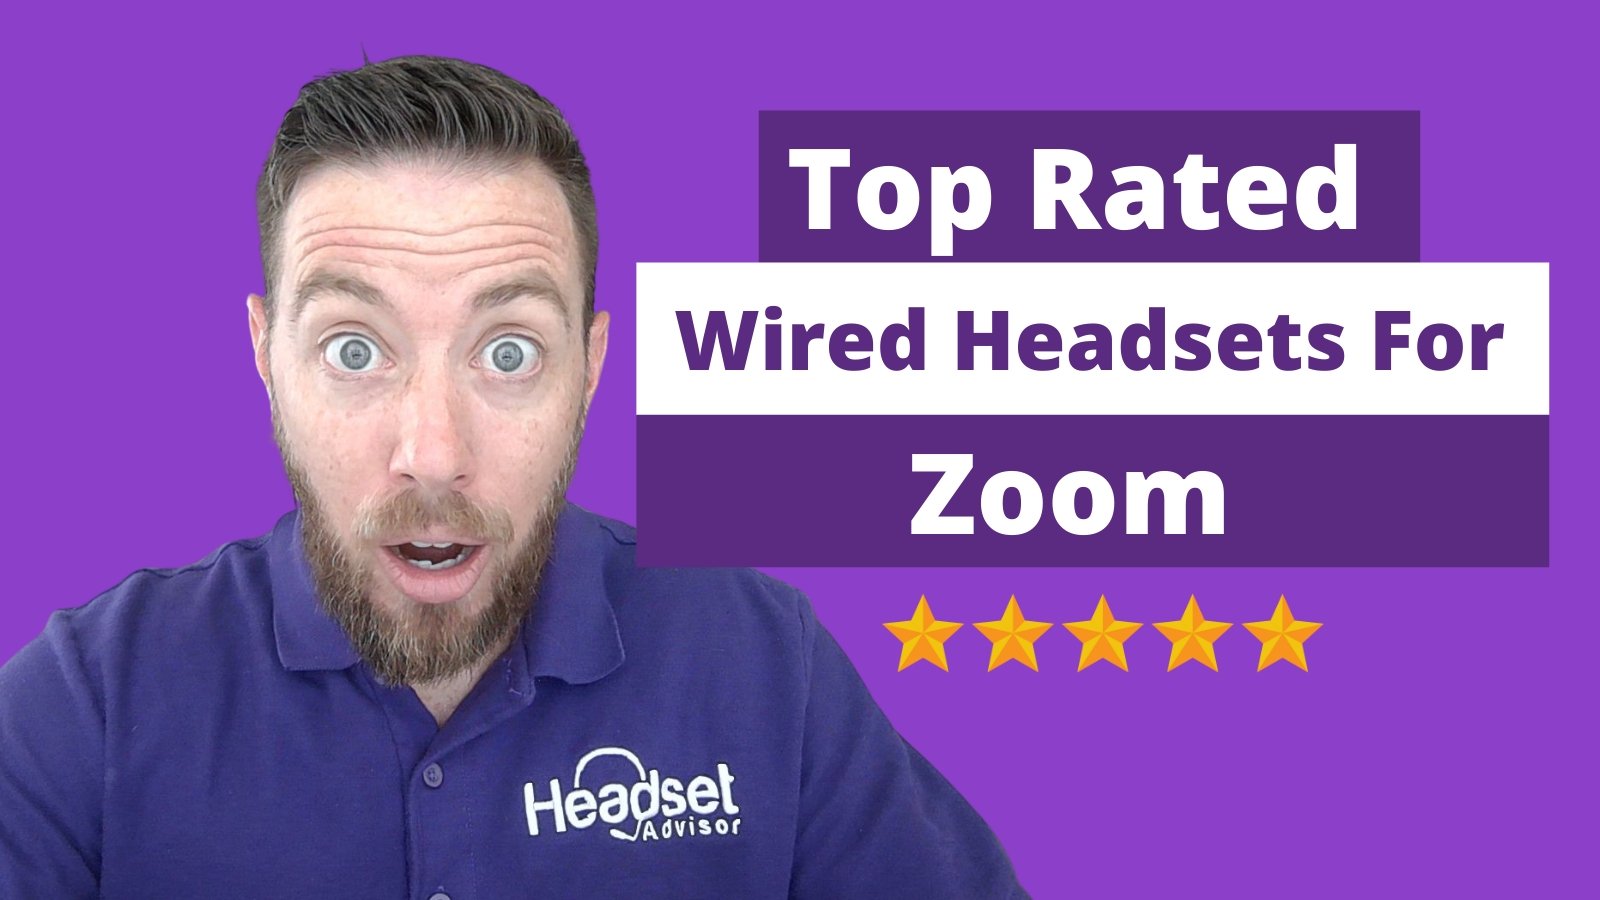 Top Rated Wired Headsets For Zoom Meetings - Headset Advisor